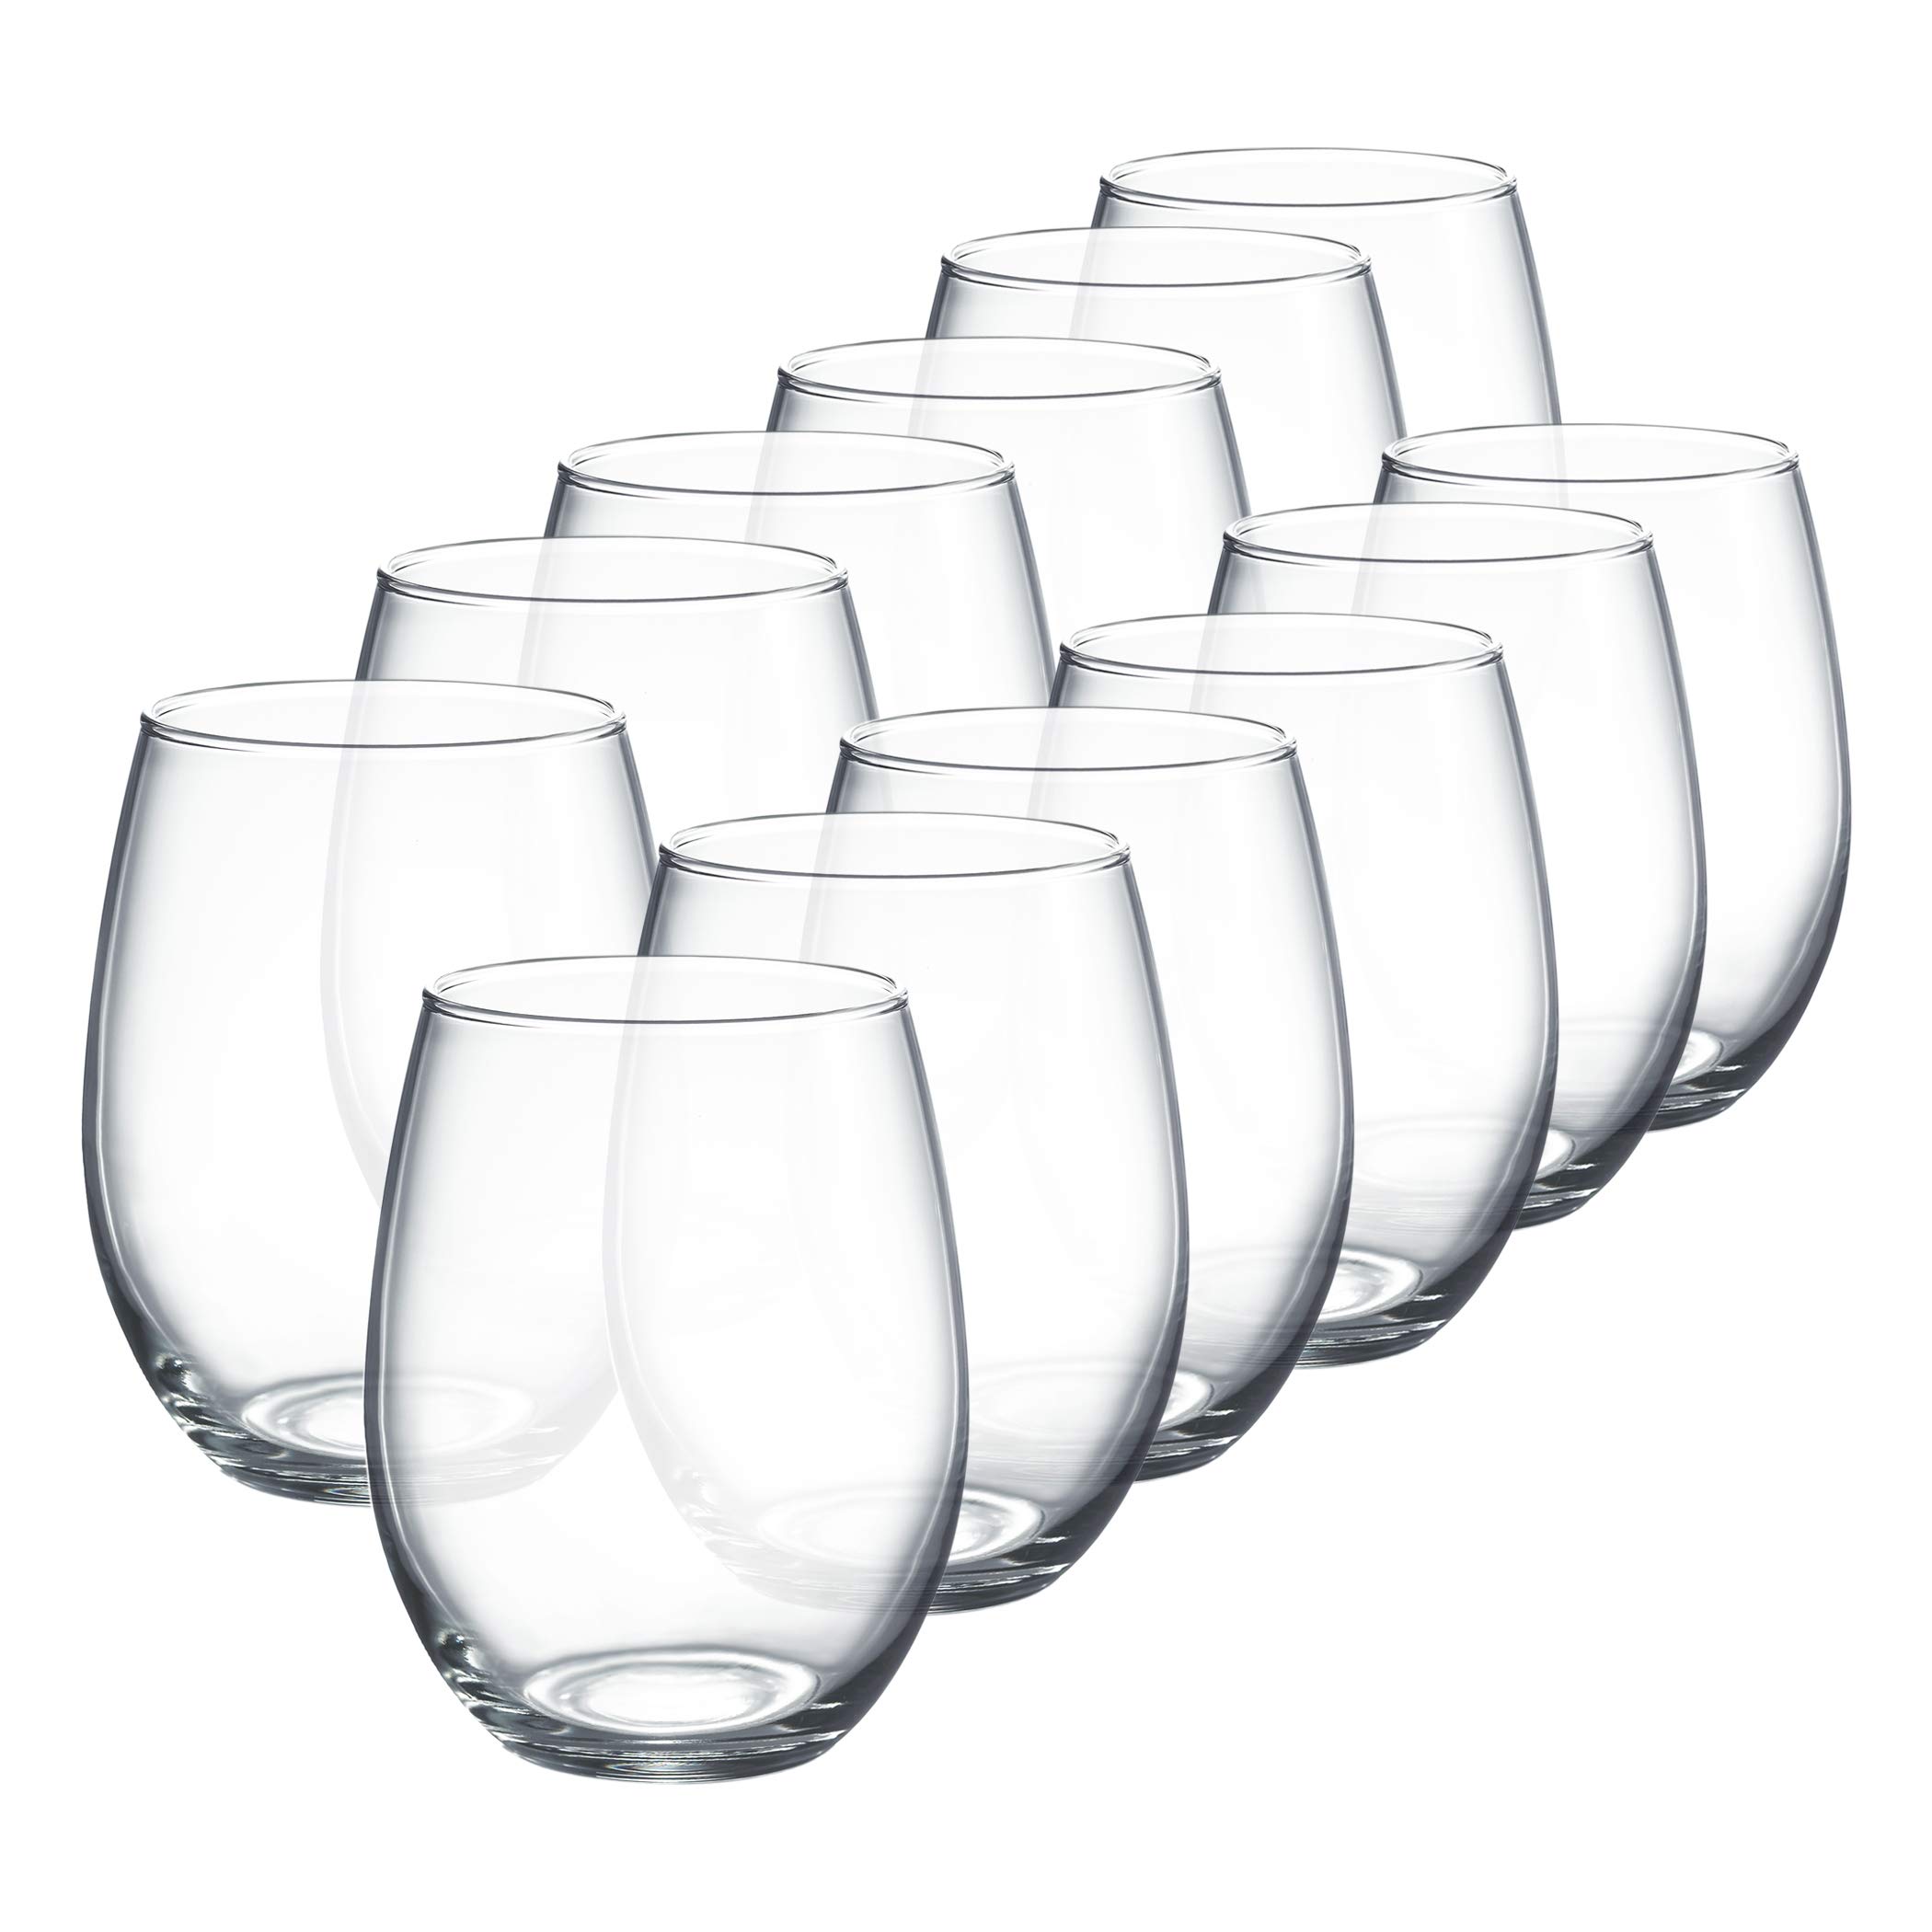 Luminarc Perfection Stemless Wine Glass (Set of 12), 15 oz, Clear - N0056 - $15.98 - Amazon